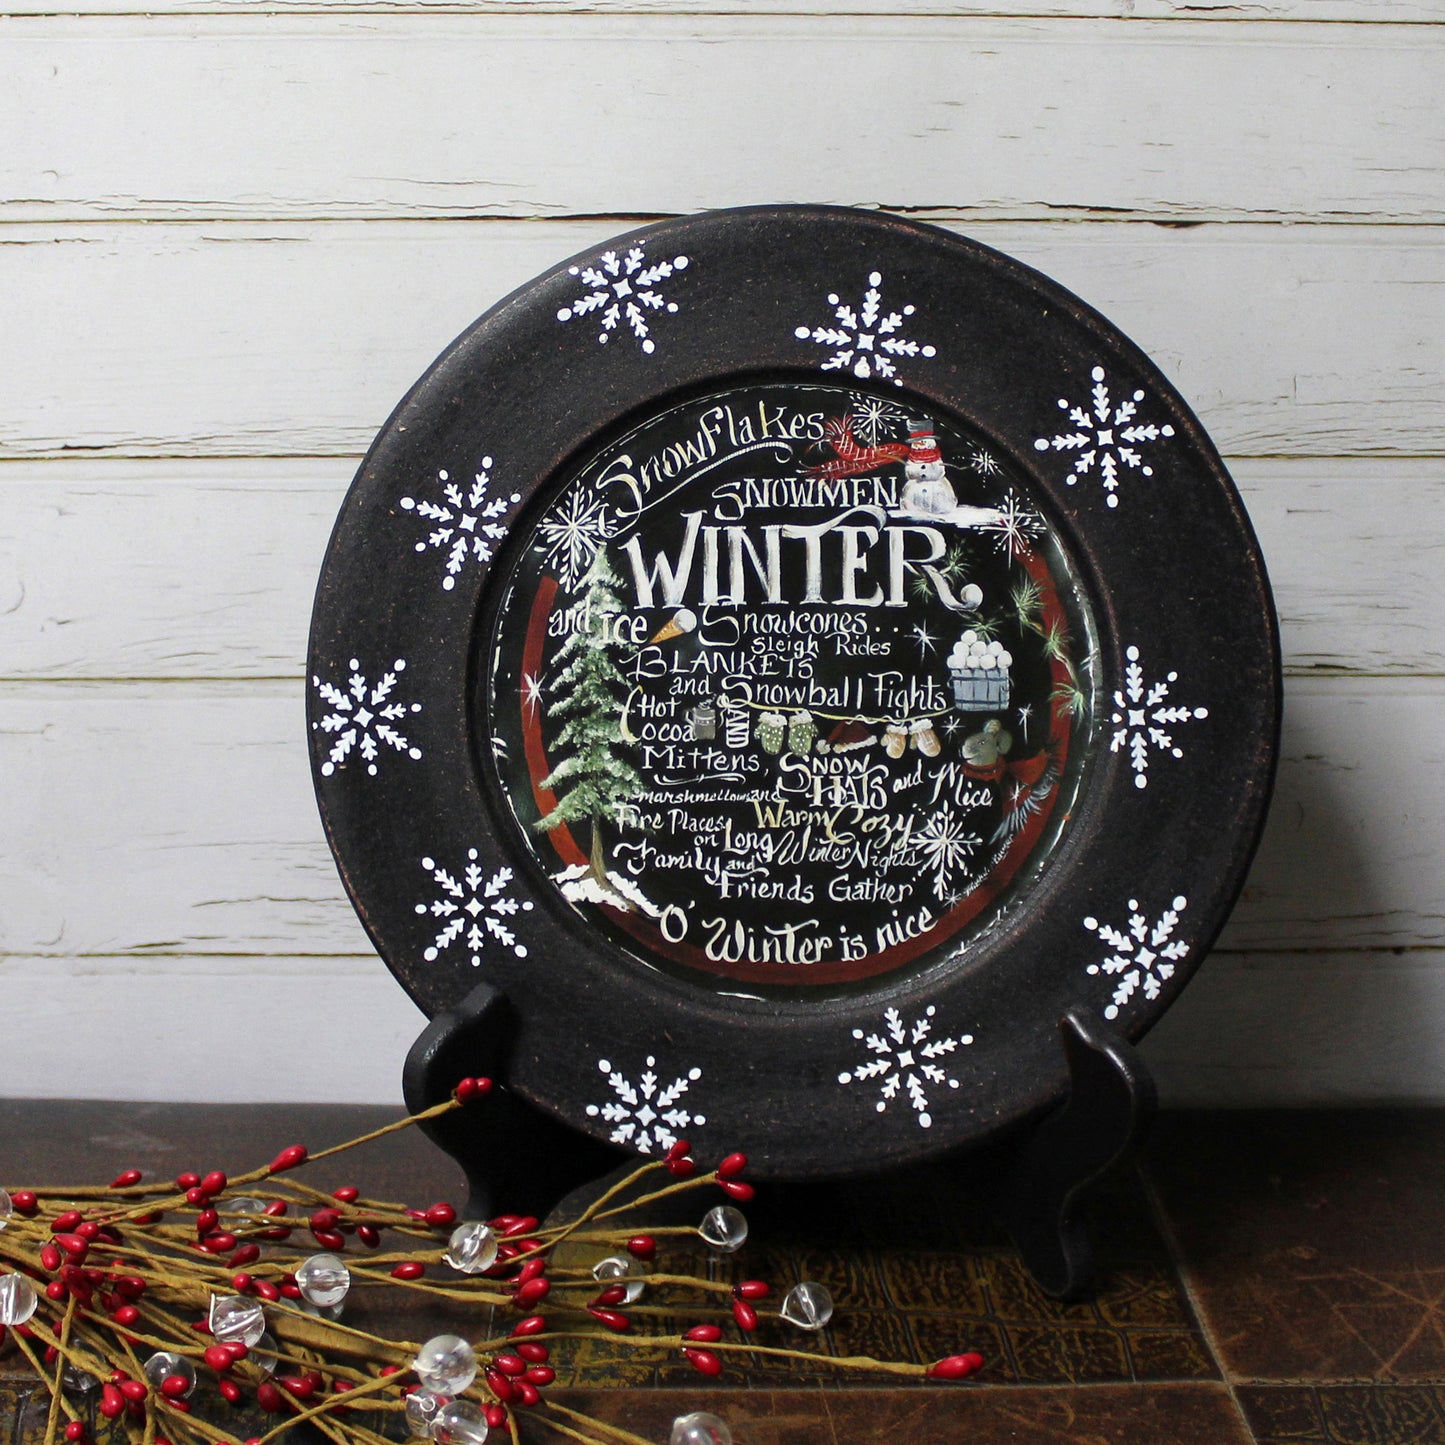 CVHOMEDECO. Winter Decorative Plate Primitives Distressed Round Christmas Display Wooden Plate Home Décor Art, 9.75 Inch